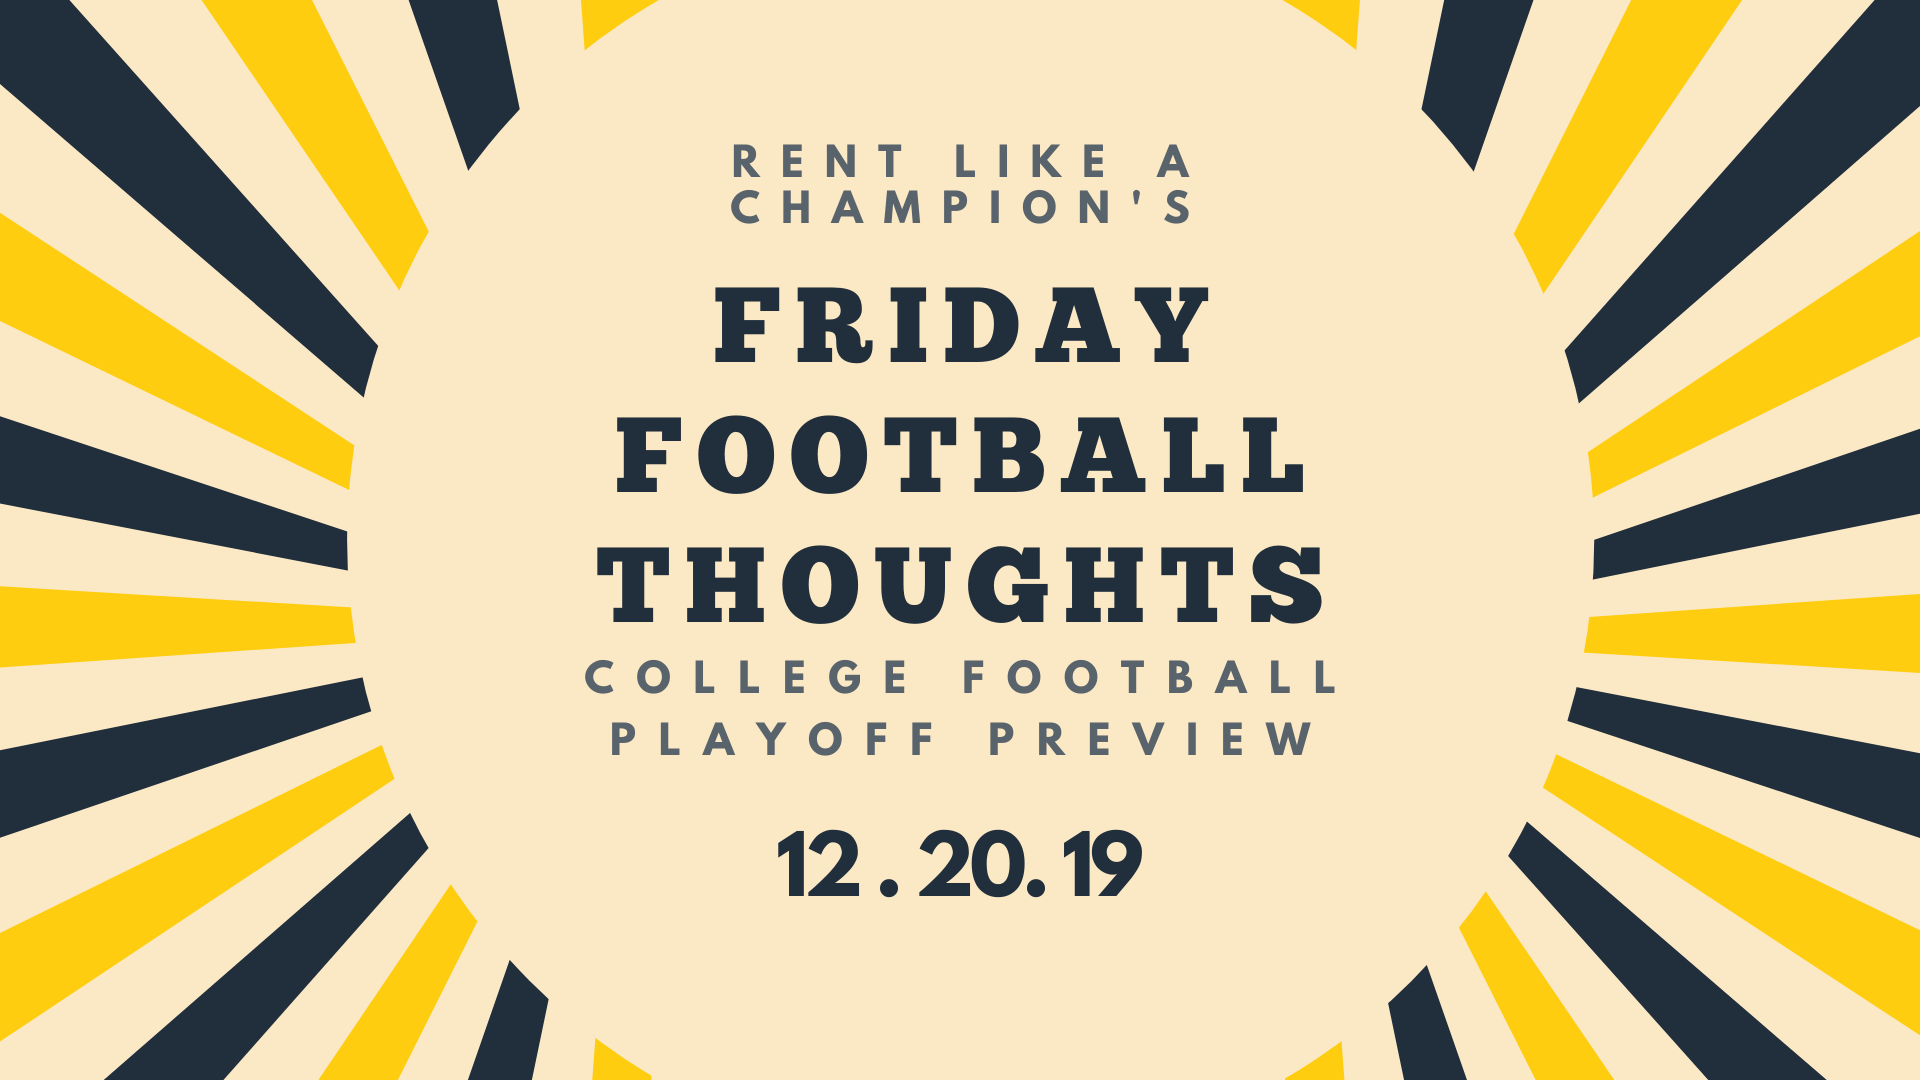 Friday Football Thoughts Template (8)